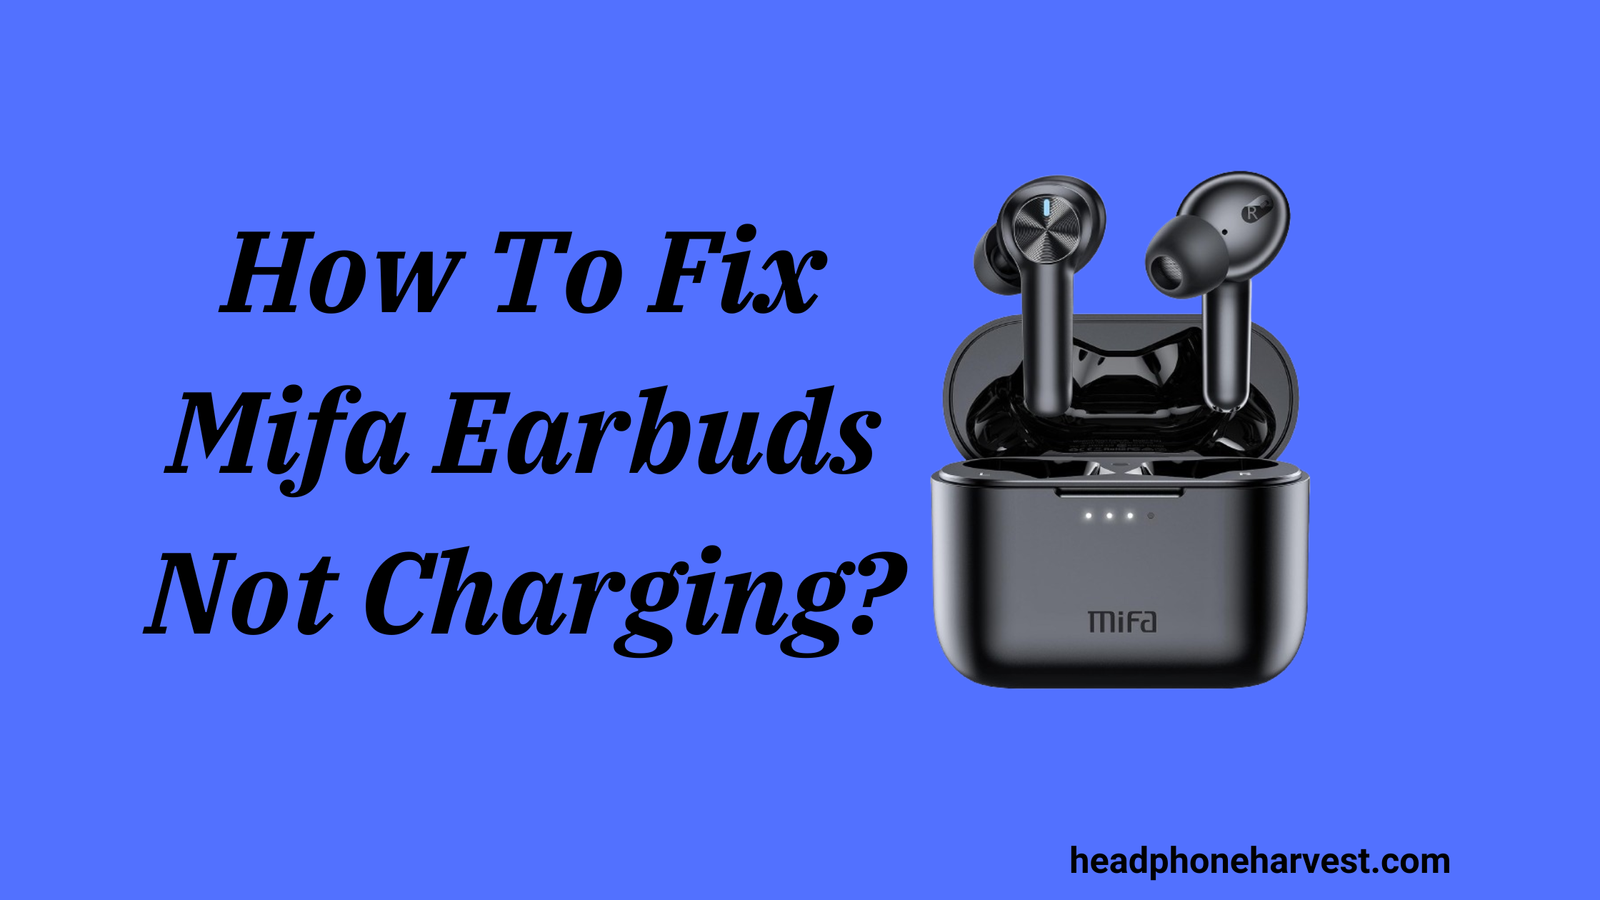 How To Fix Mifa Earbuds Not Charging?